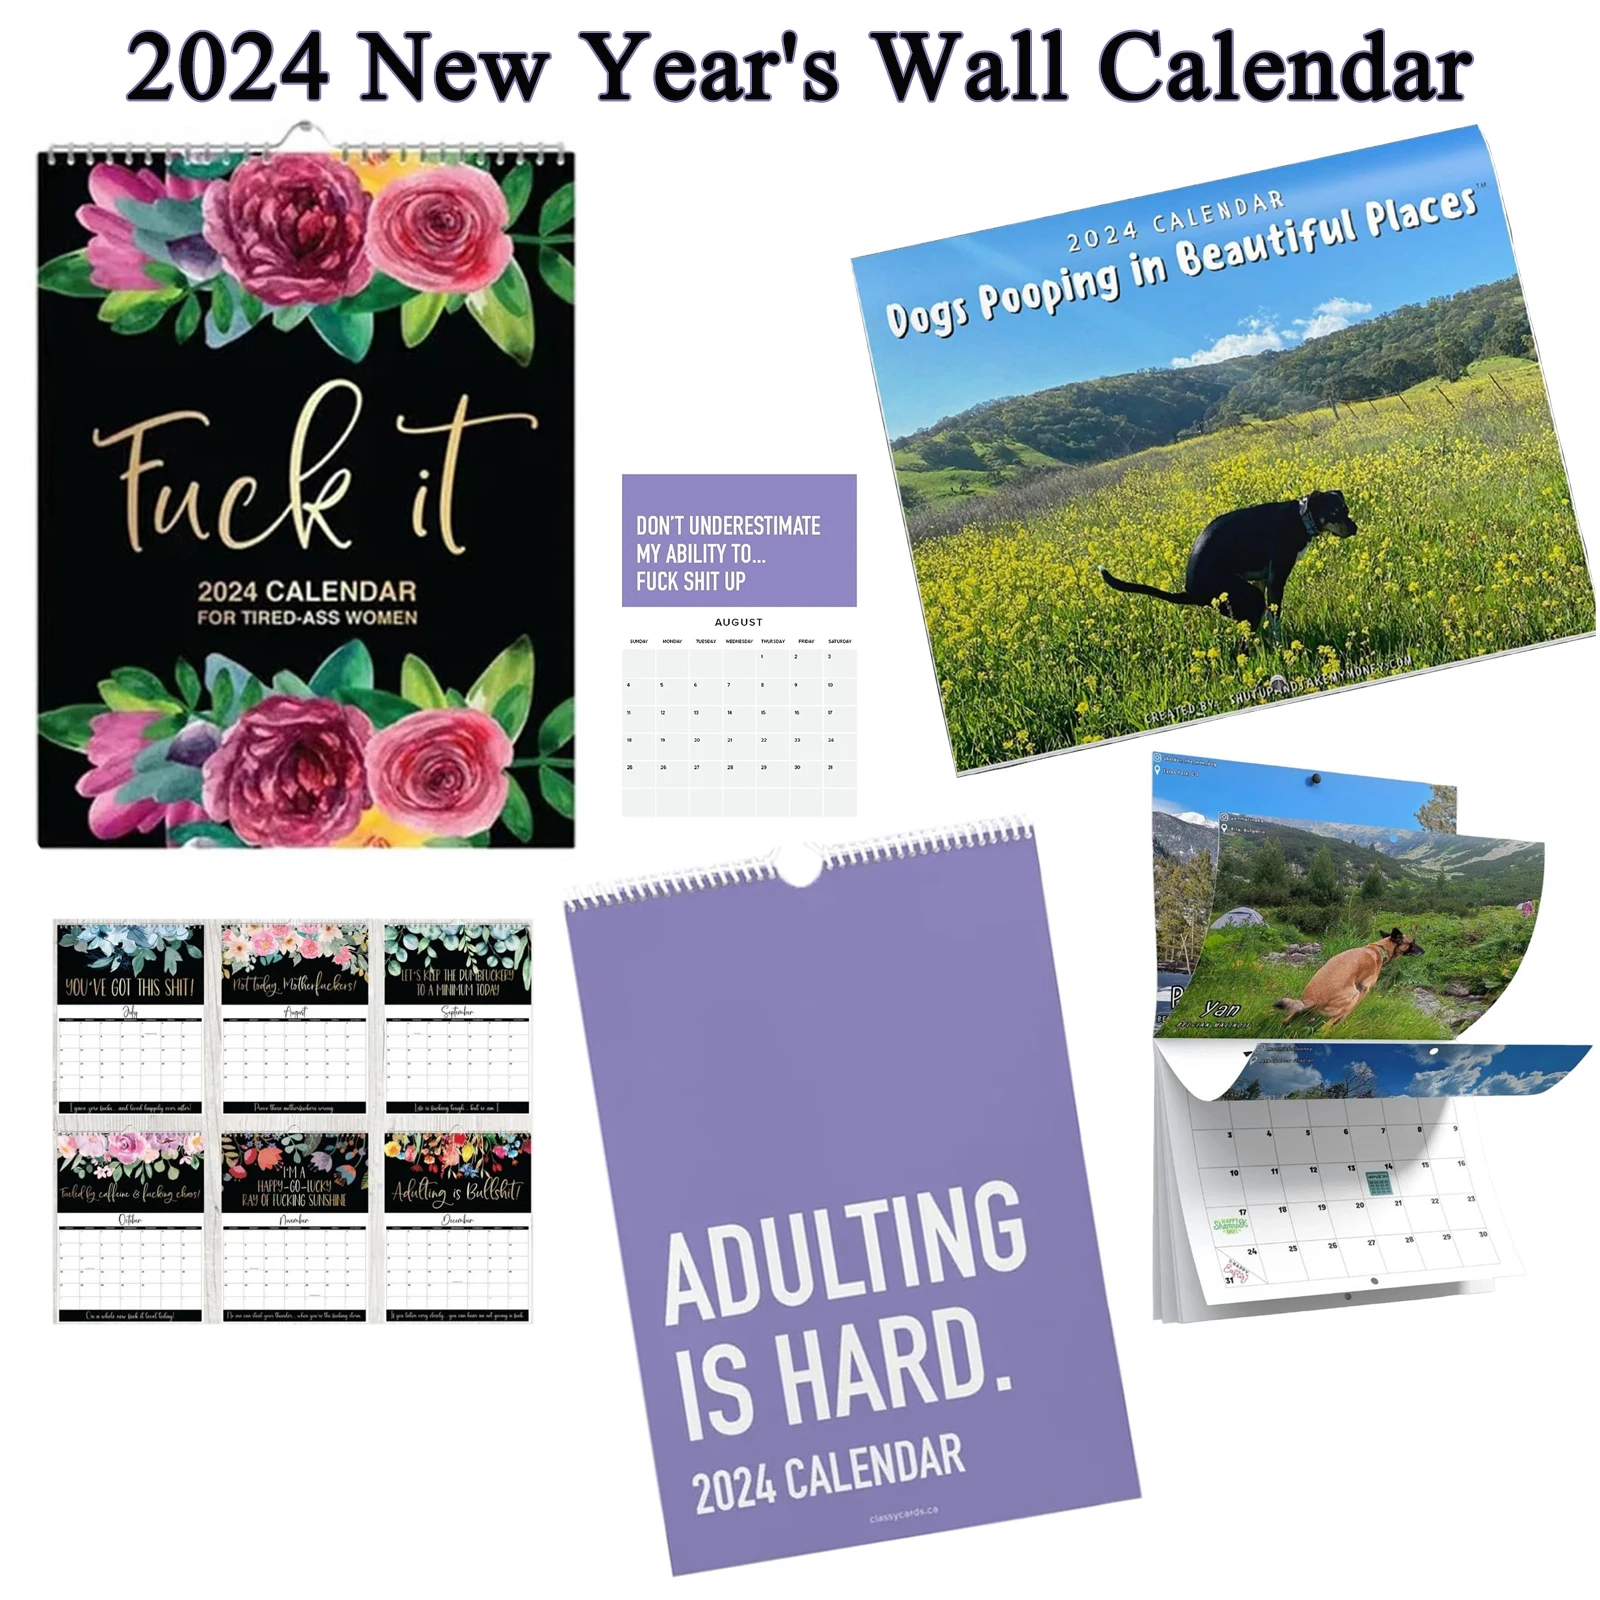 Monthly Wall Calendar 2024 Funny Dog Pooping Calendar Gift Flowers Hanging Calendar Time Planning New Year Home Indoor Decor outdoor monitor video phone 3mp 64g memory card home security protection surveillance camera time display function